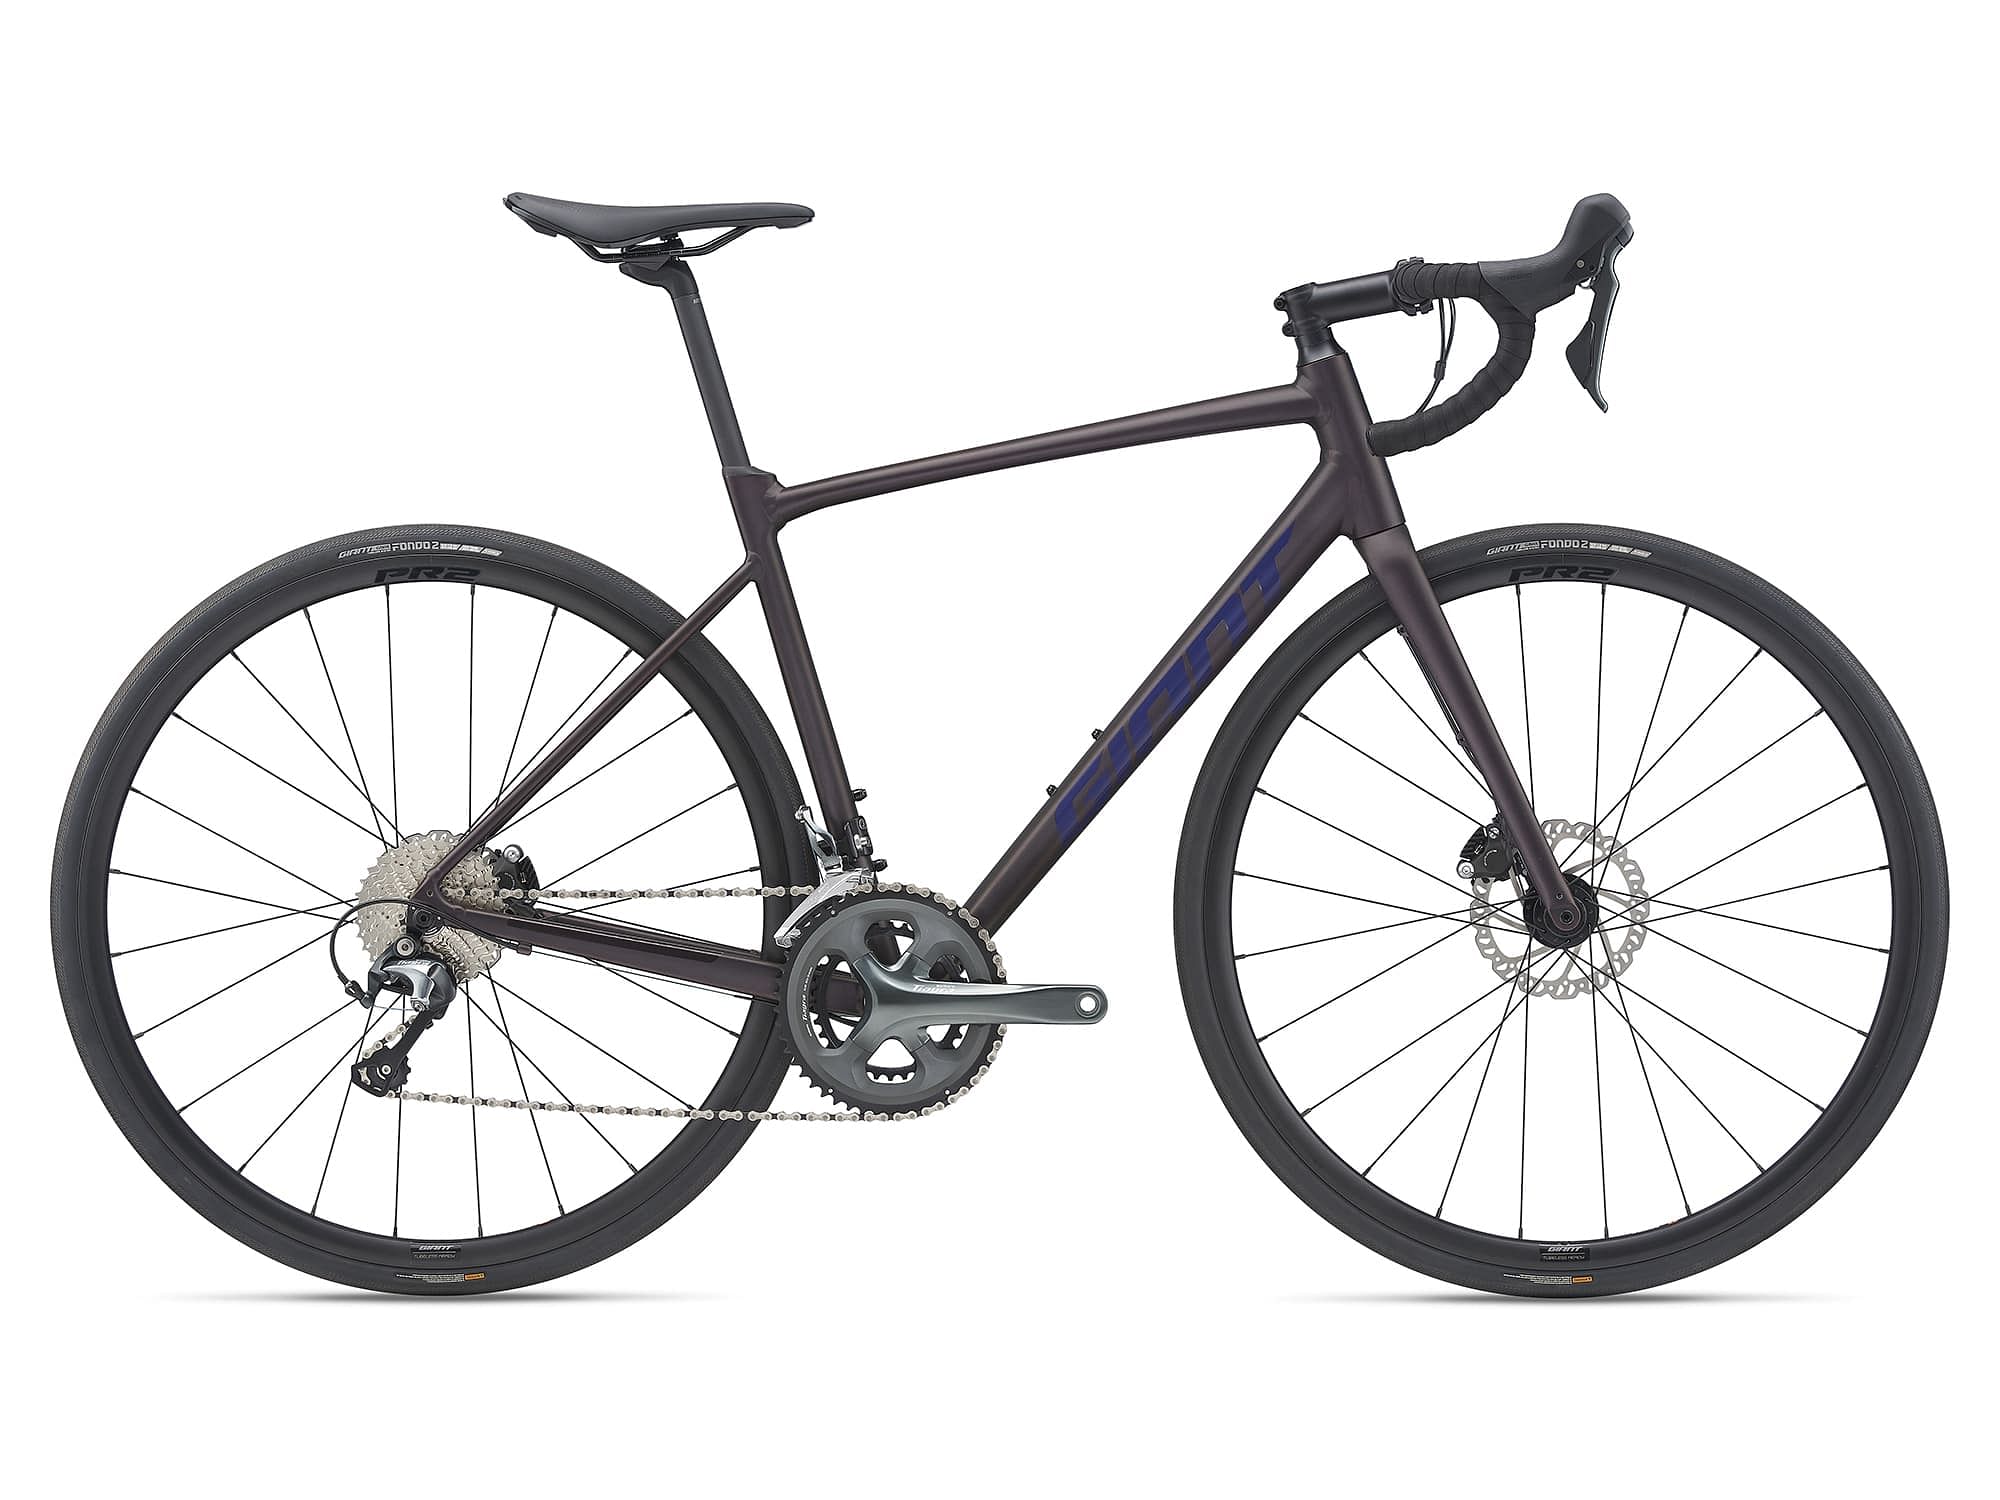 Giant Contend SL 2 Disc cycle